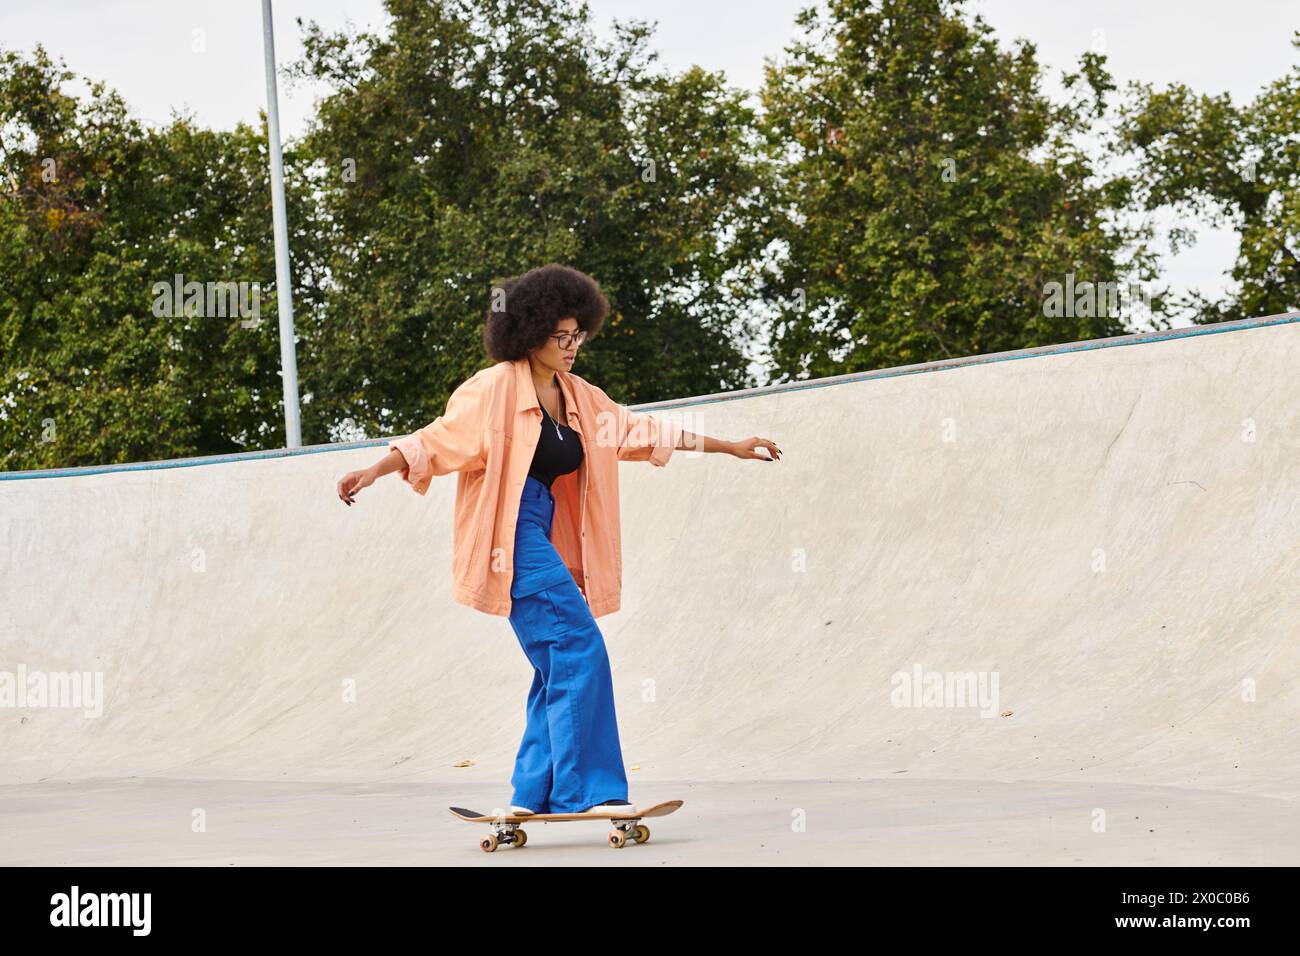 A young African American woman with curly hair skillfully rides a skateboard up the side of a ramp at an outdoor skate park. Stock Photo